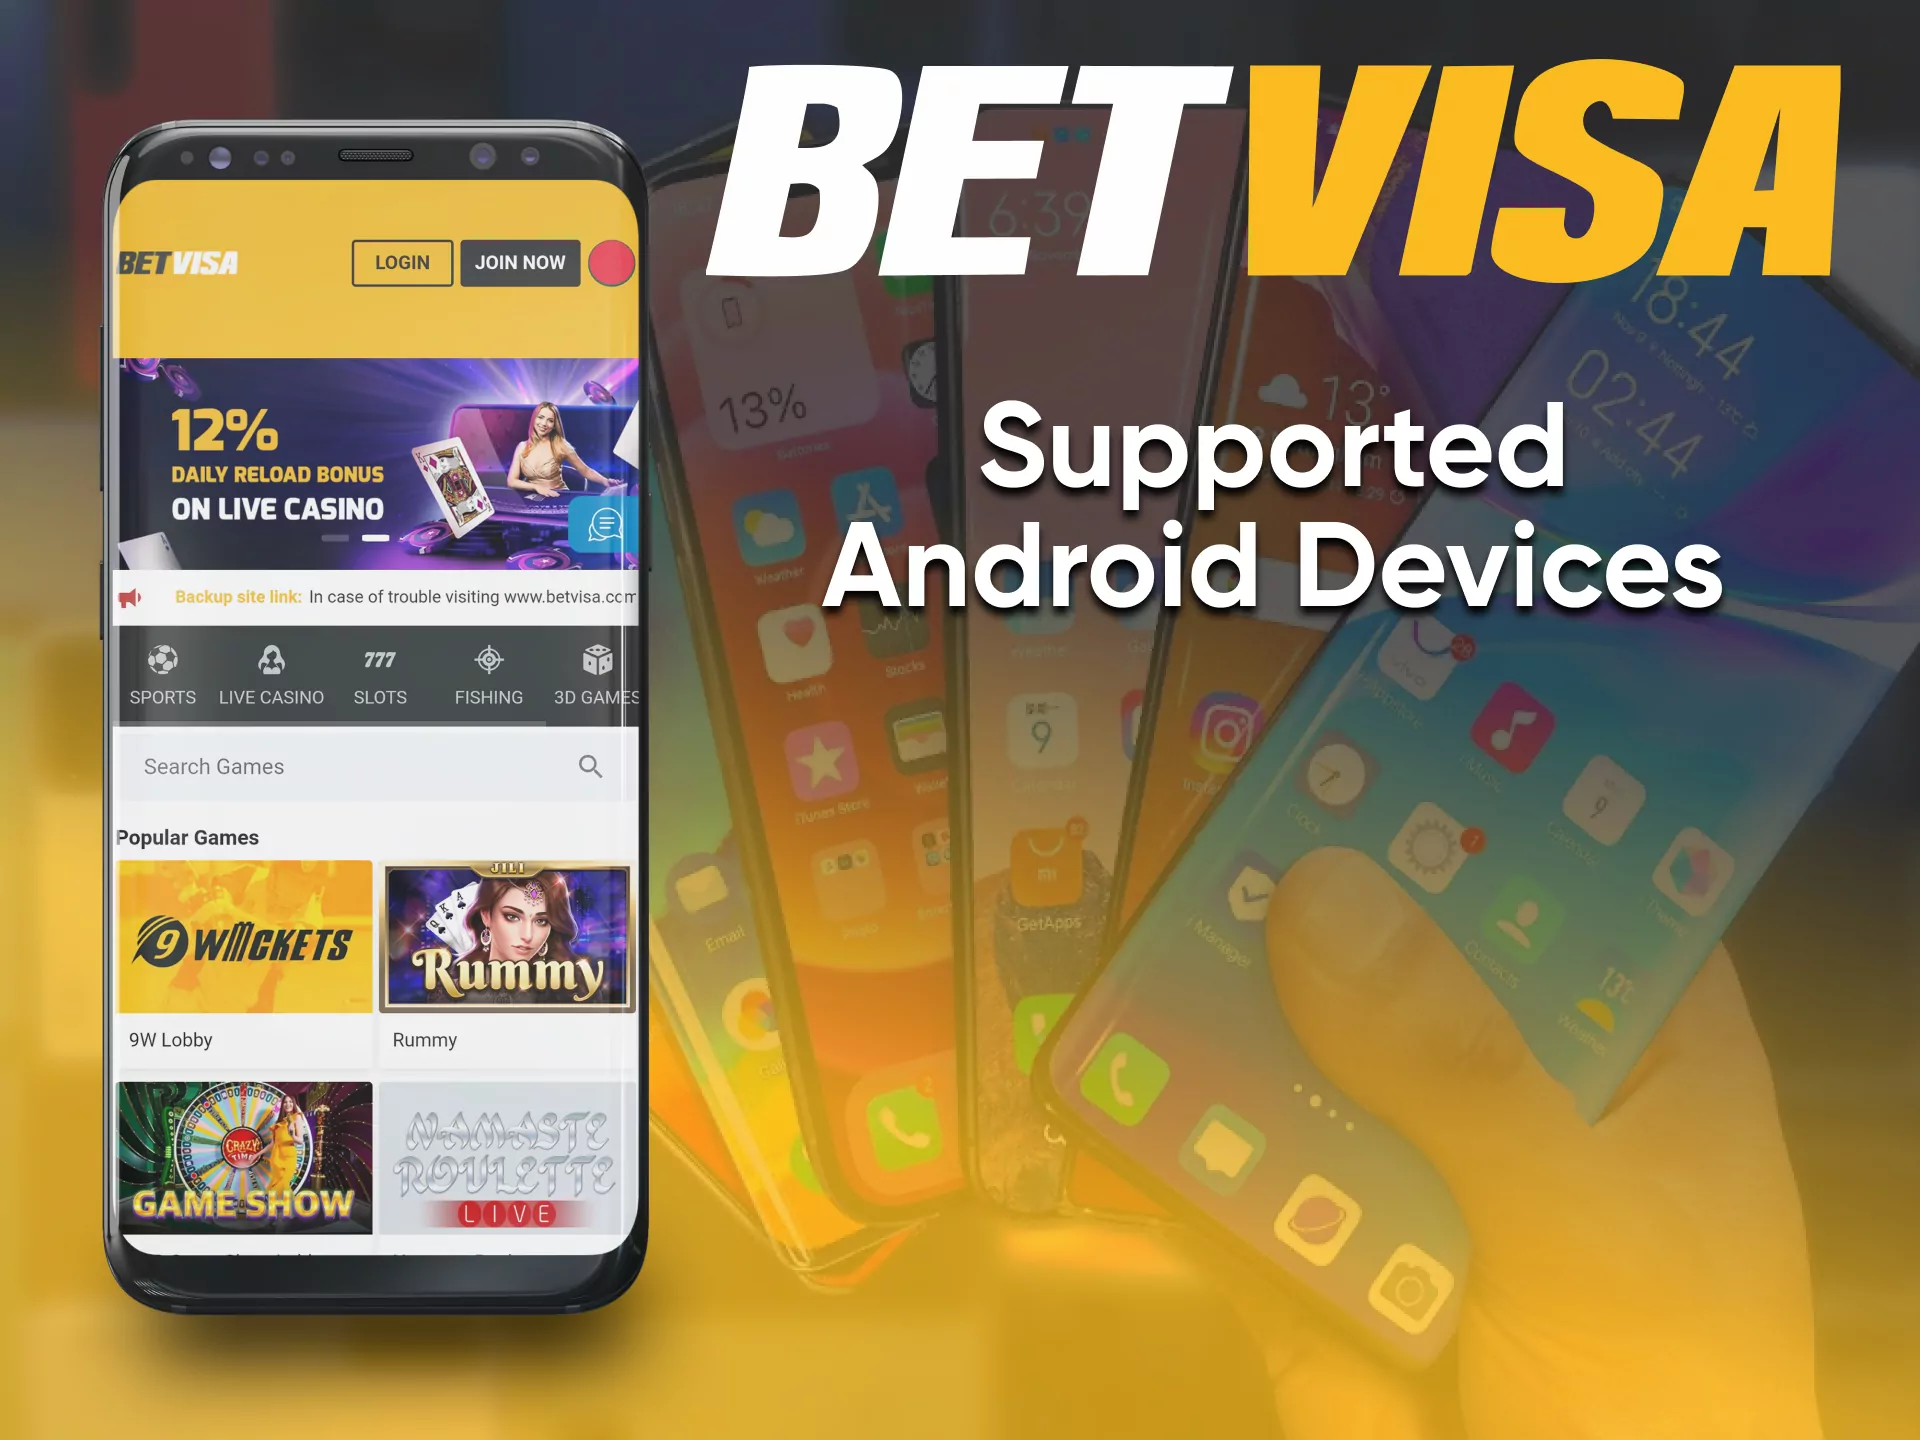 Play at BetVisa Casino on your device.